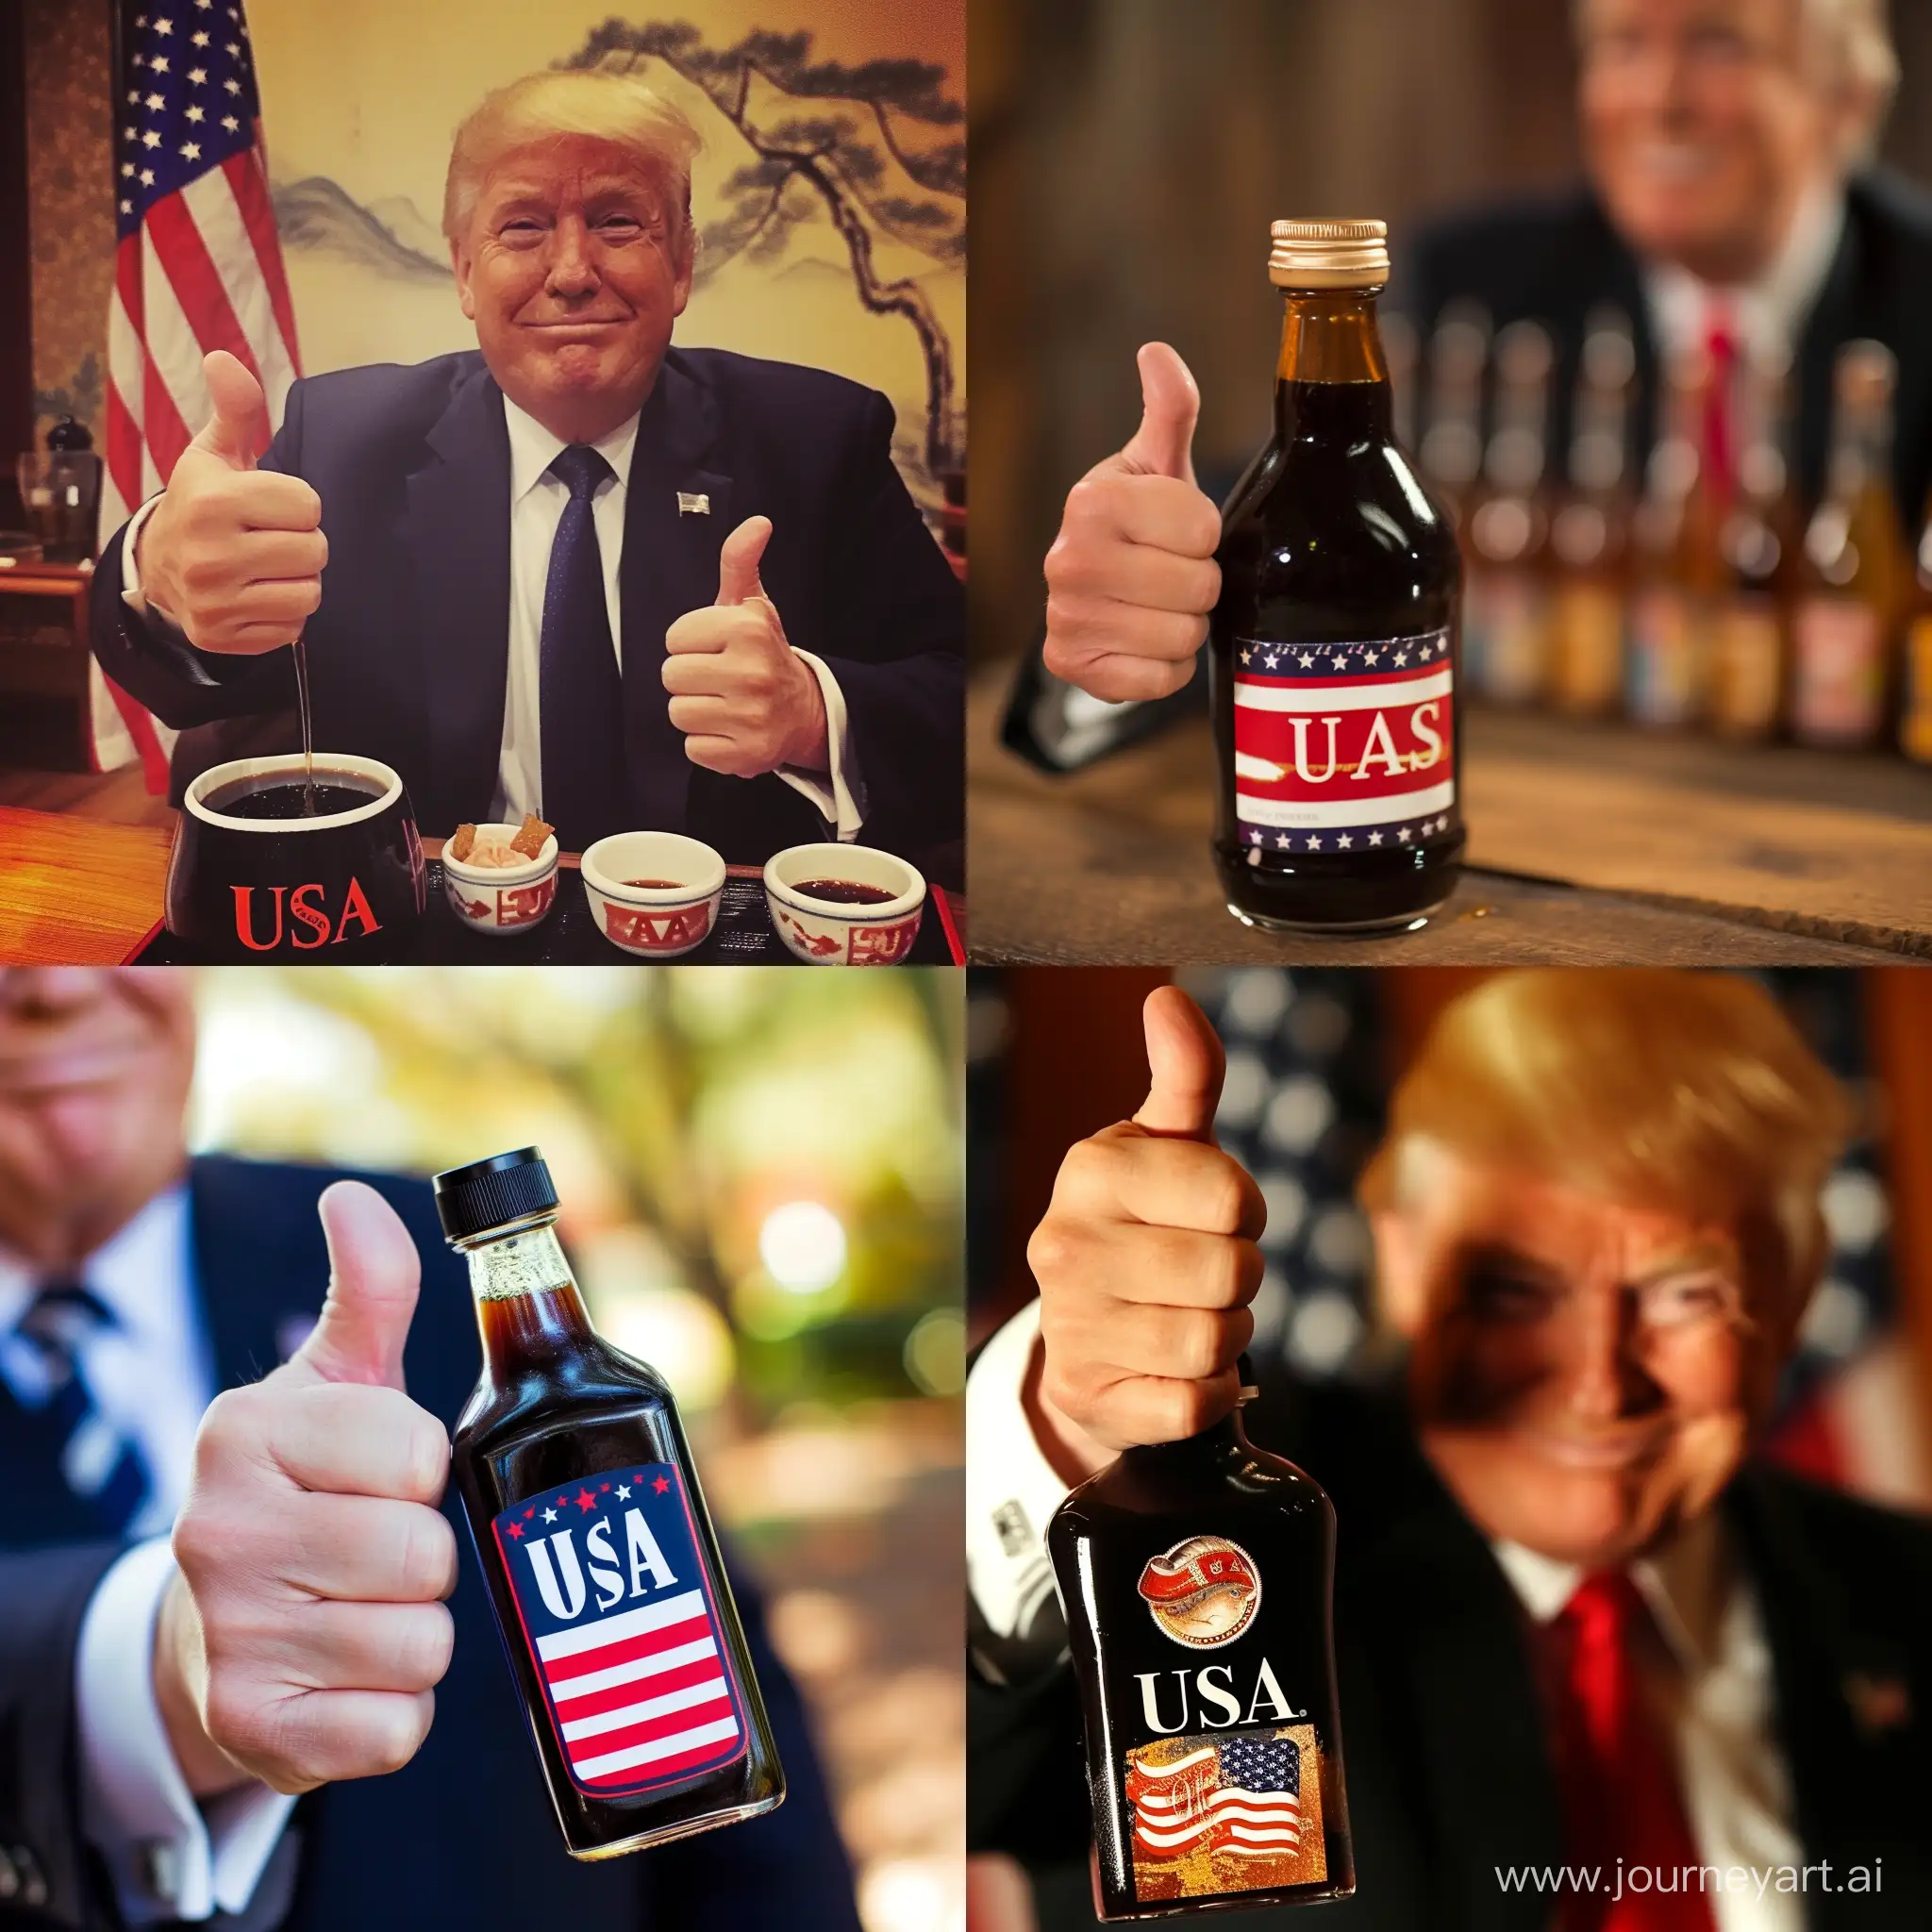 USA brand soy sauce, made in the USA, patriotic, Donald Trump thumbs up